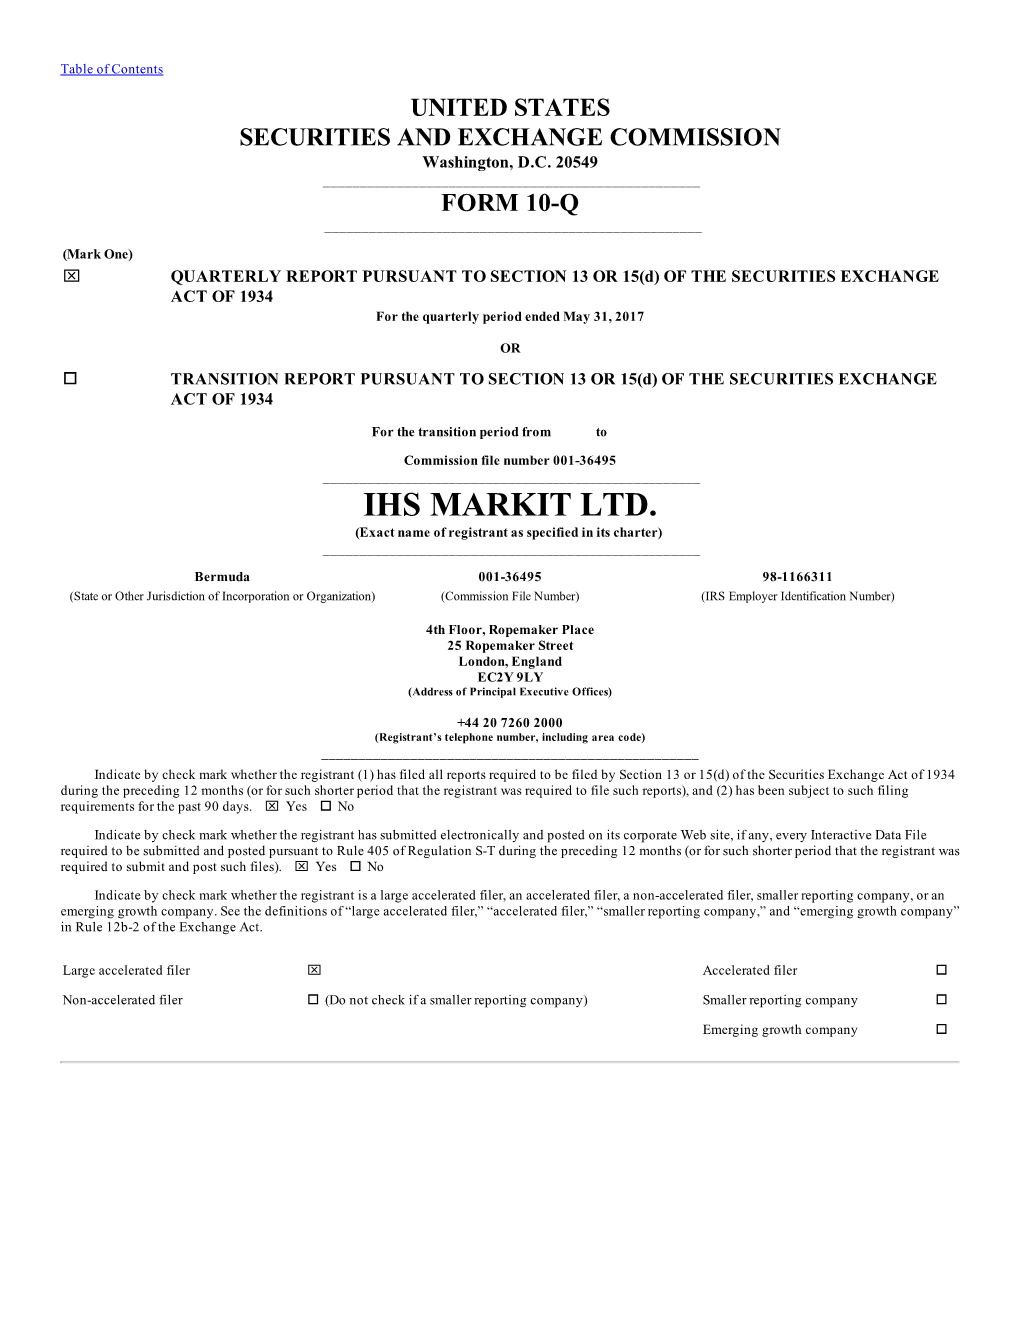 IHS MARKIT LTD. (Exact Name of Registrant As Specified in Its Charter) ______